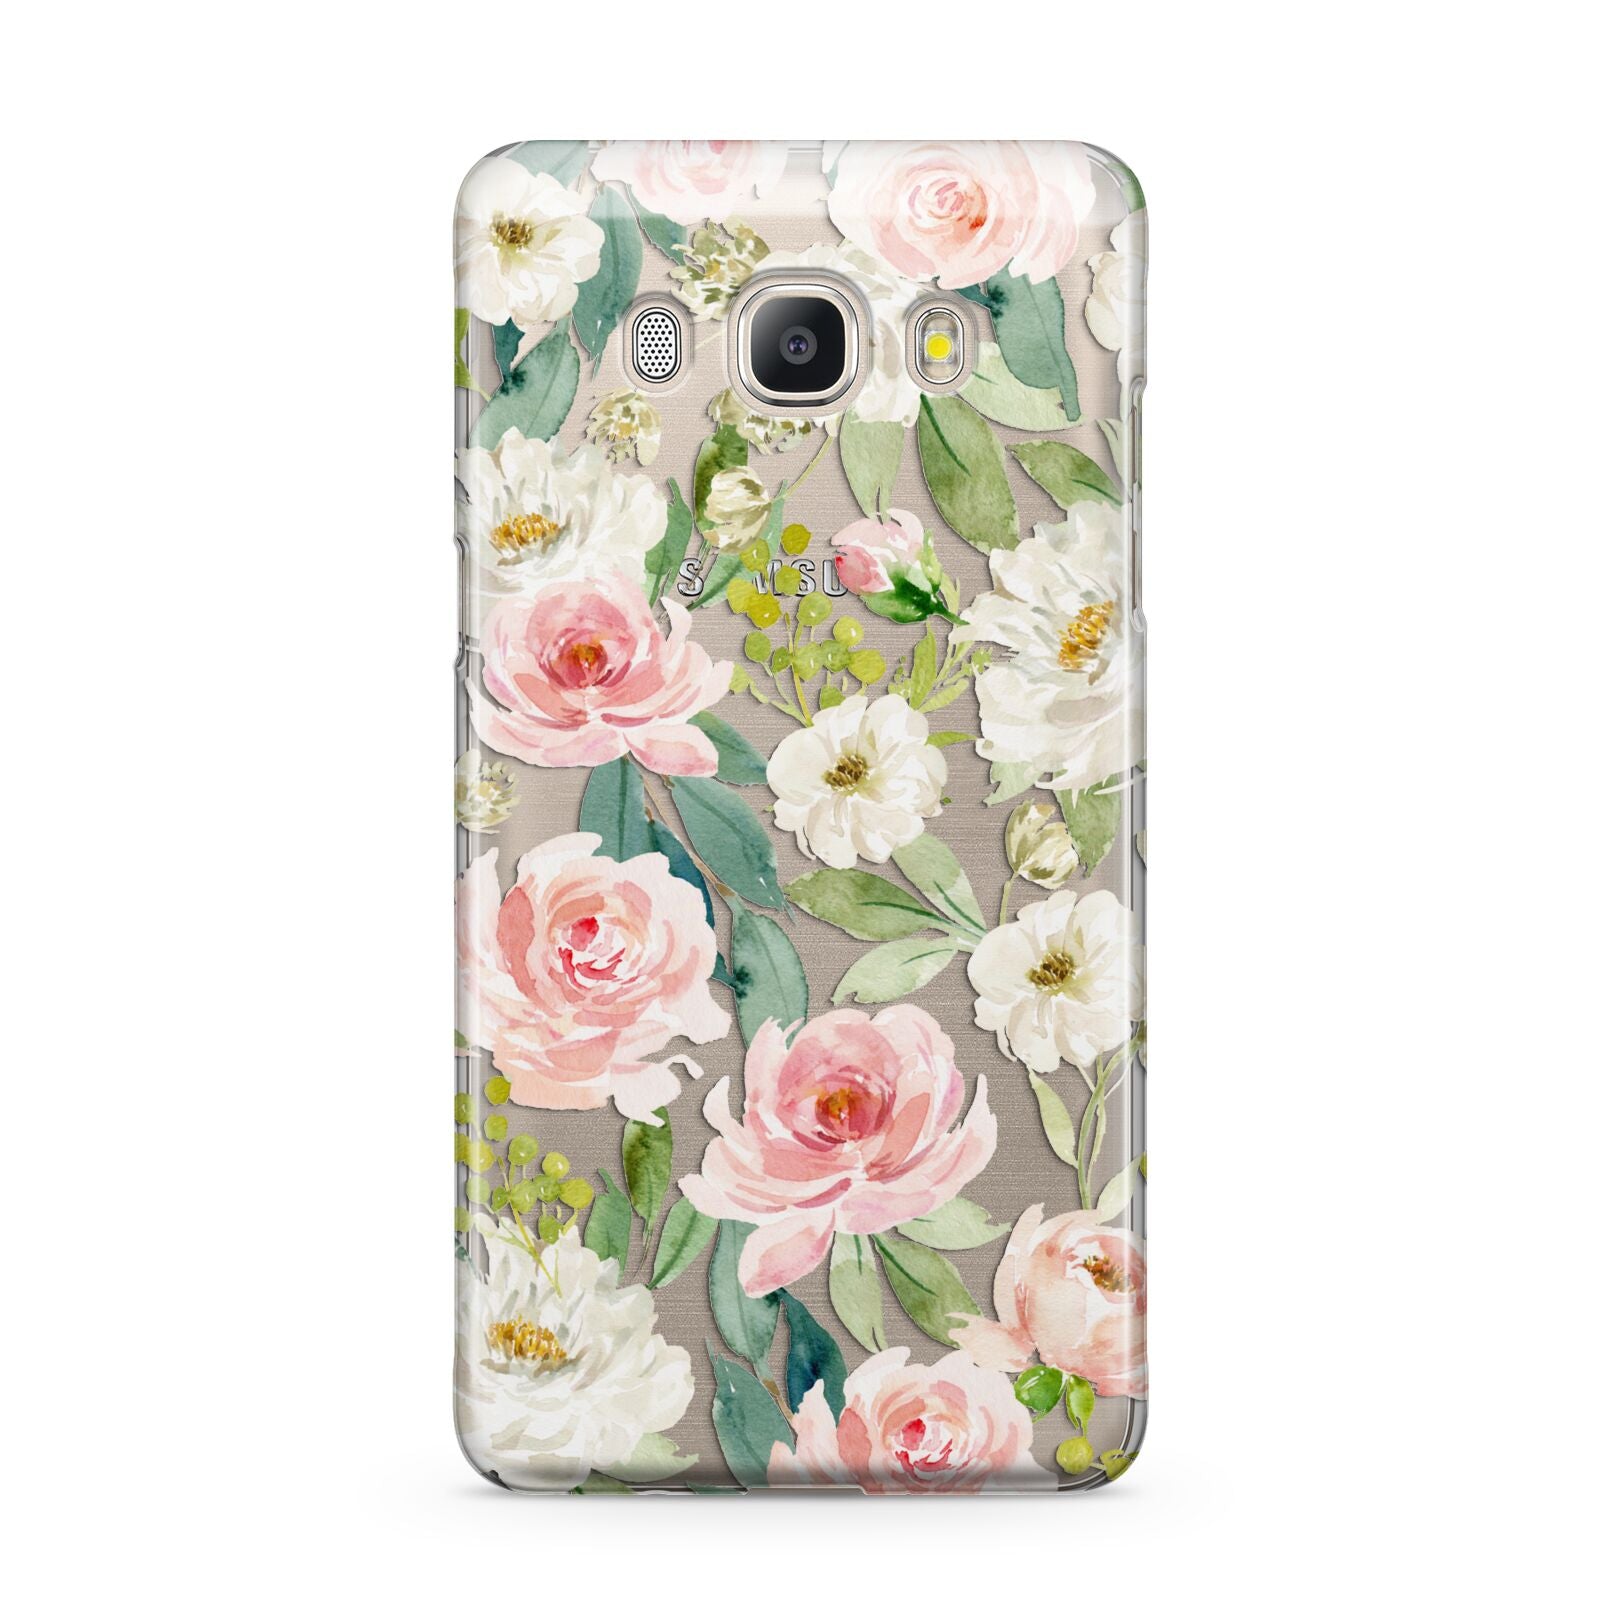 Watercolour Peonies Roses and Foliage Samsung Galaxy J5 2016 Case